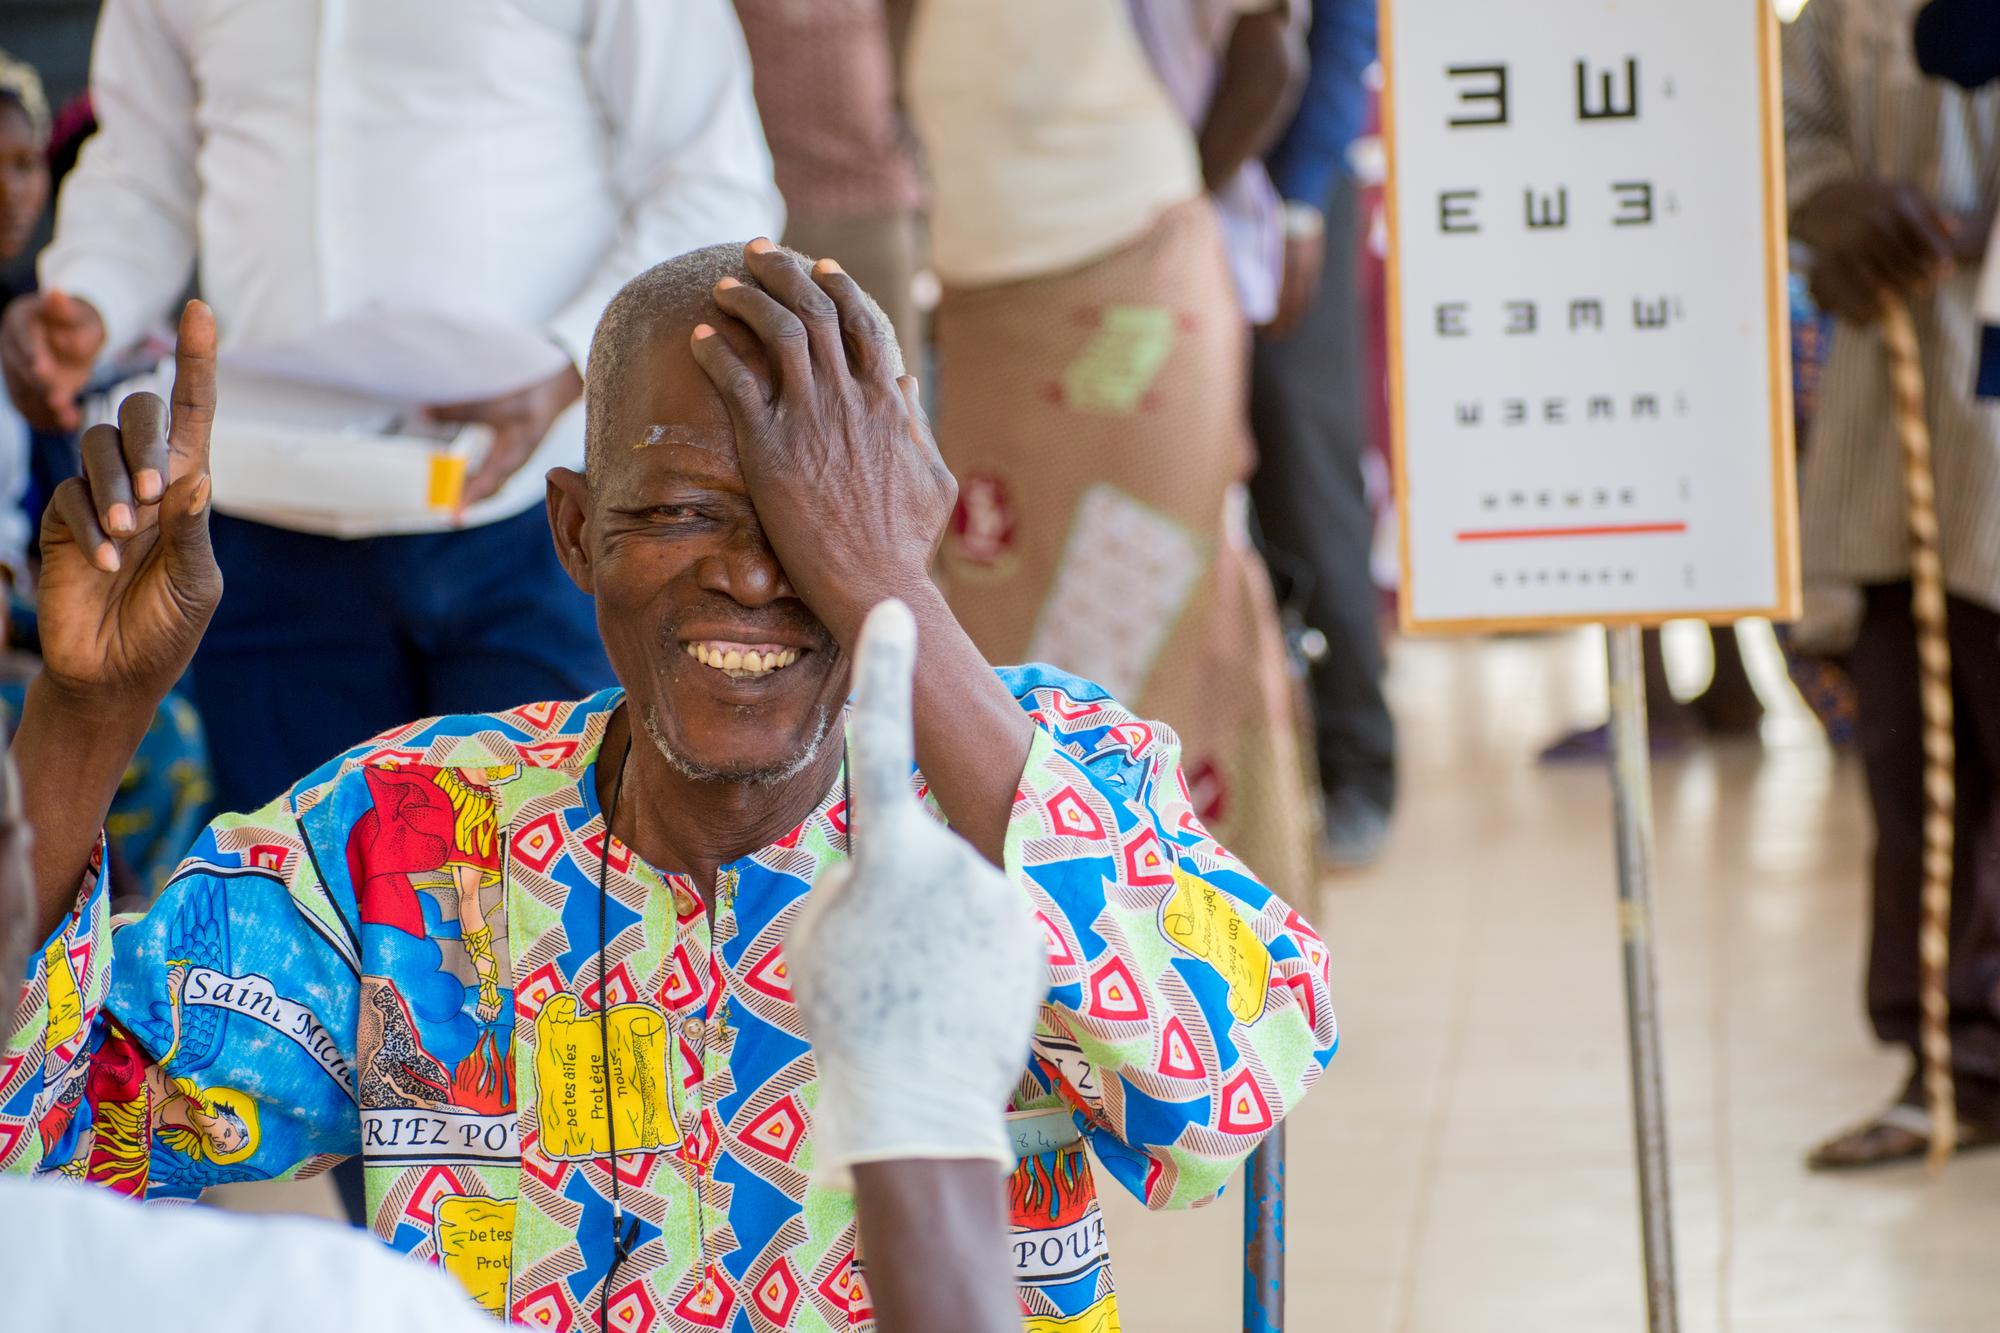 Slideshow image showing how Light for the World supports people with cataracts with free eye surgery.